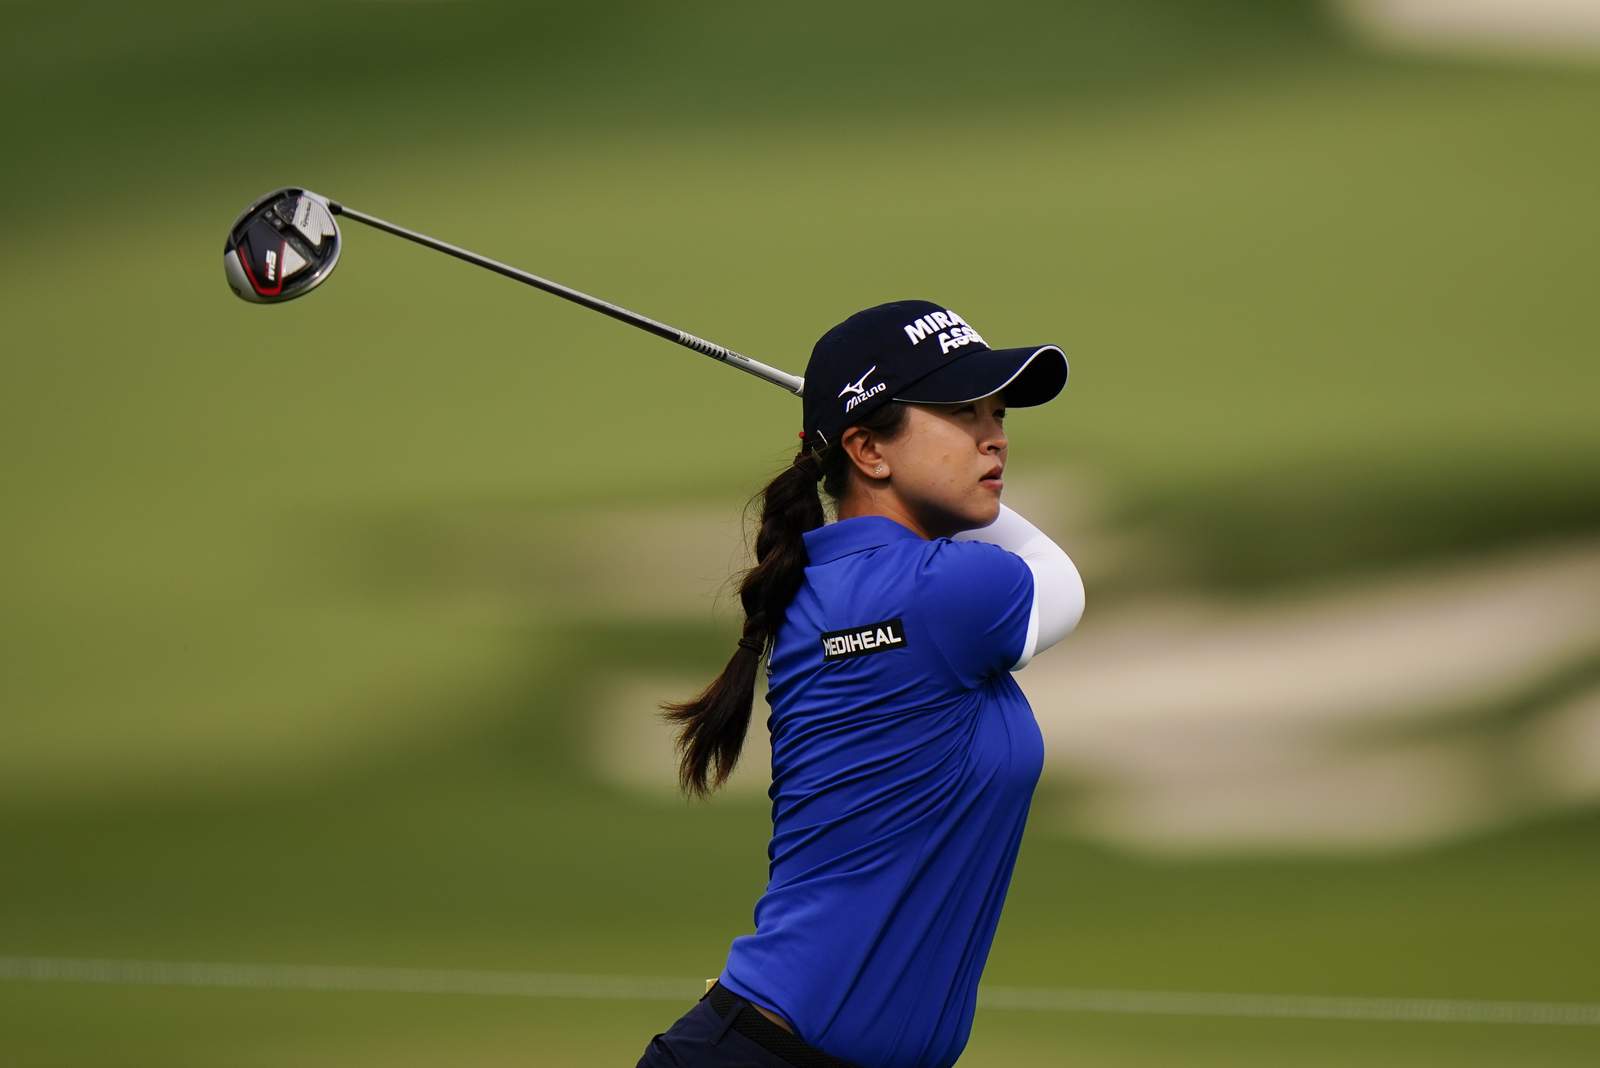 Sei Young Kim, eyeing 1st major, leads by 2 at Women's PGA